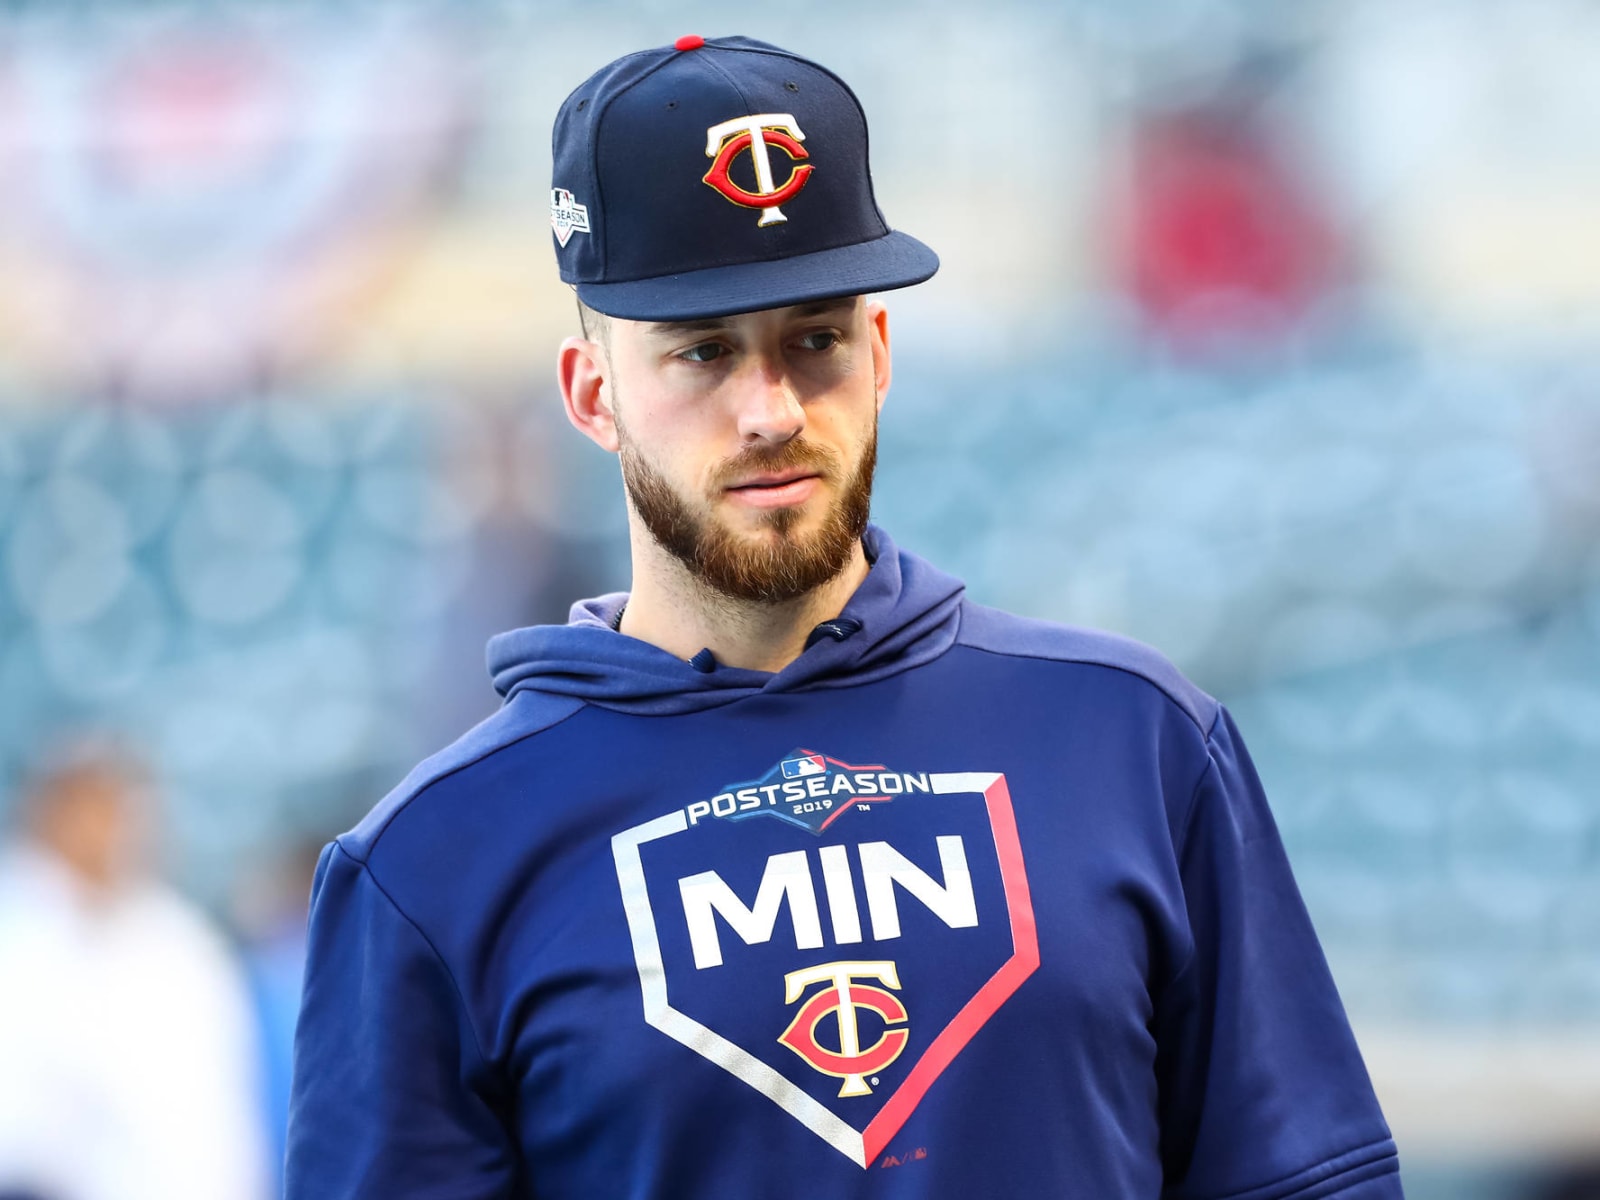 I'm going to be the guy': Mitch Garver's rise to become the Twins